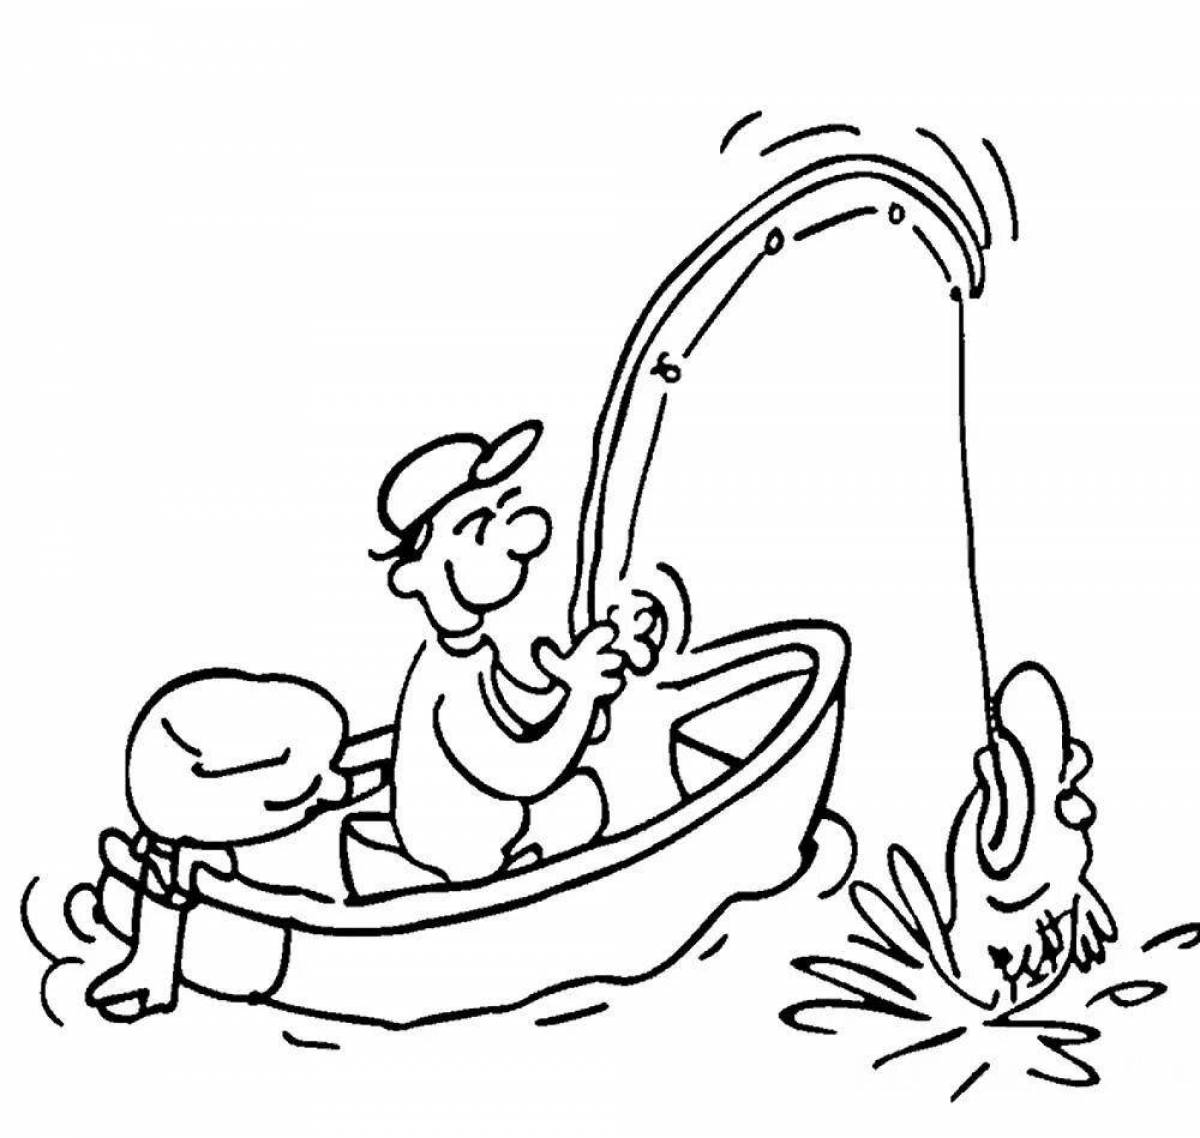 Outstanding fisherman coloring pages for children